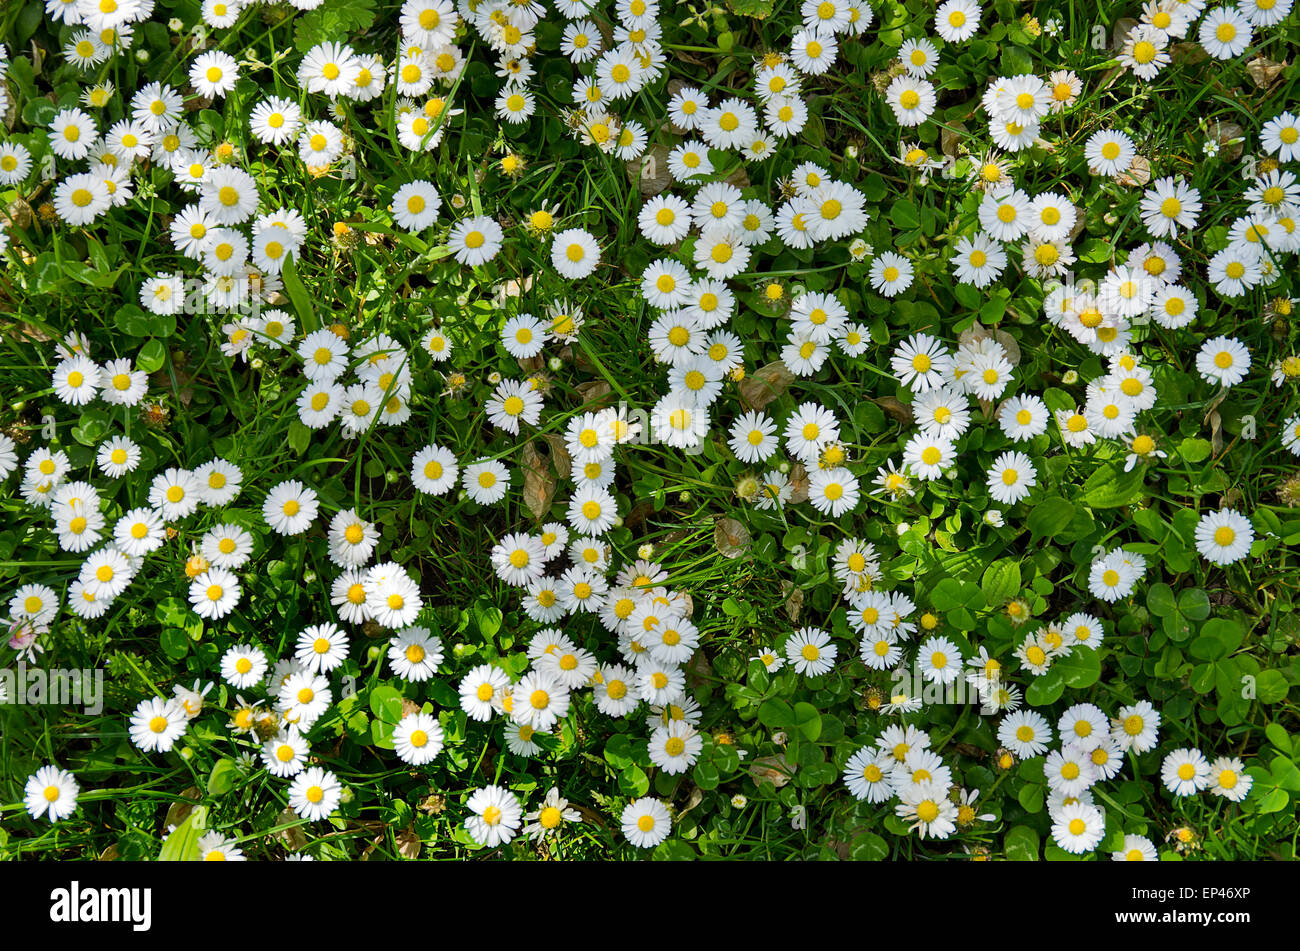 Daisies and clover on a meadow. Stock Photo